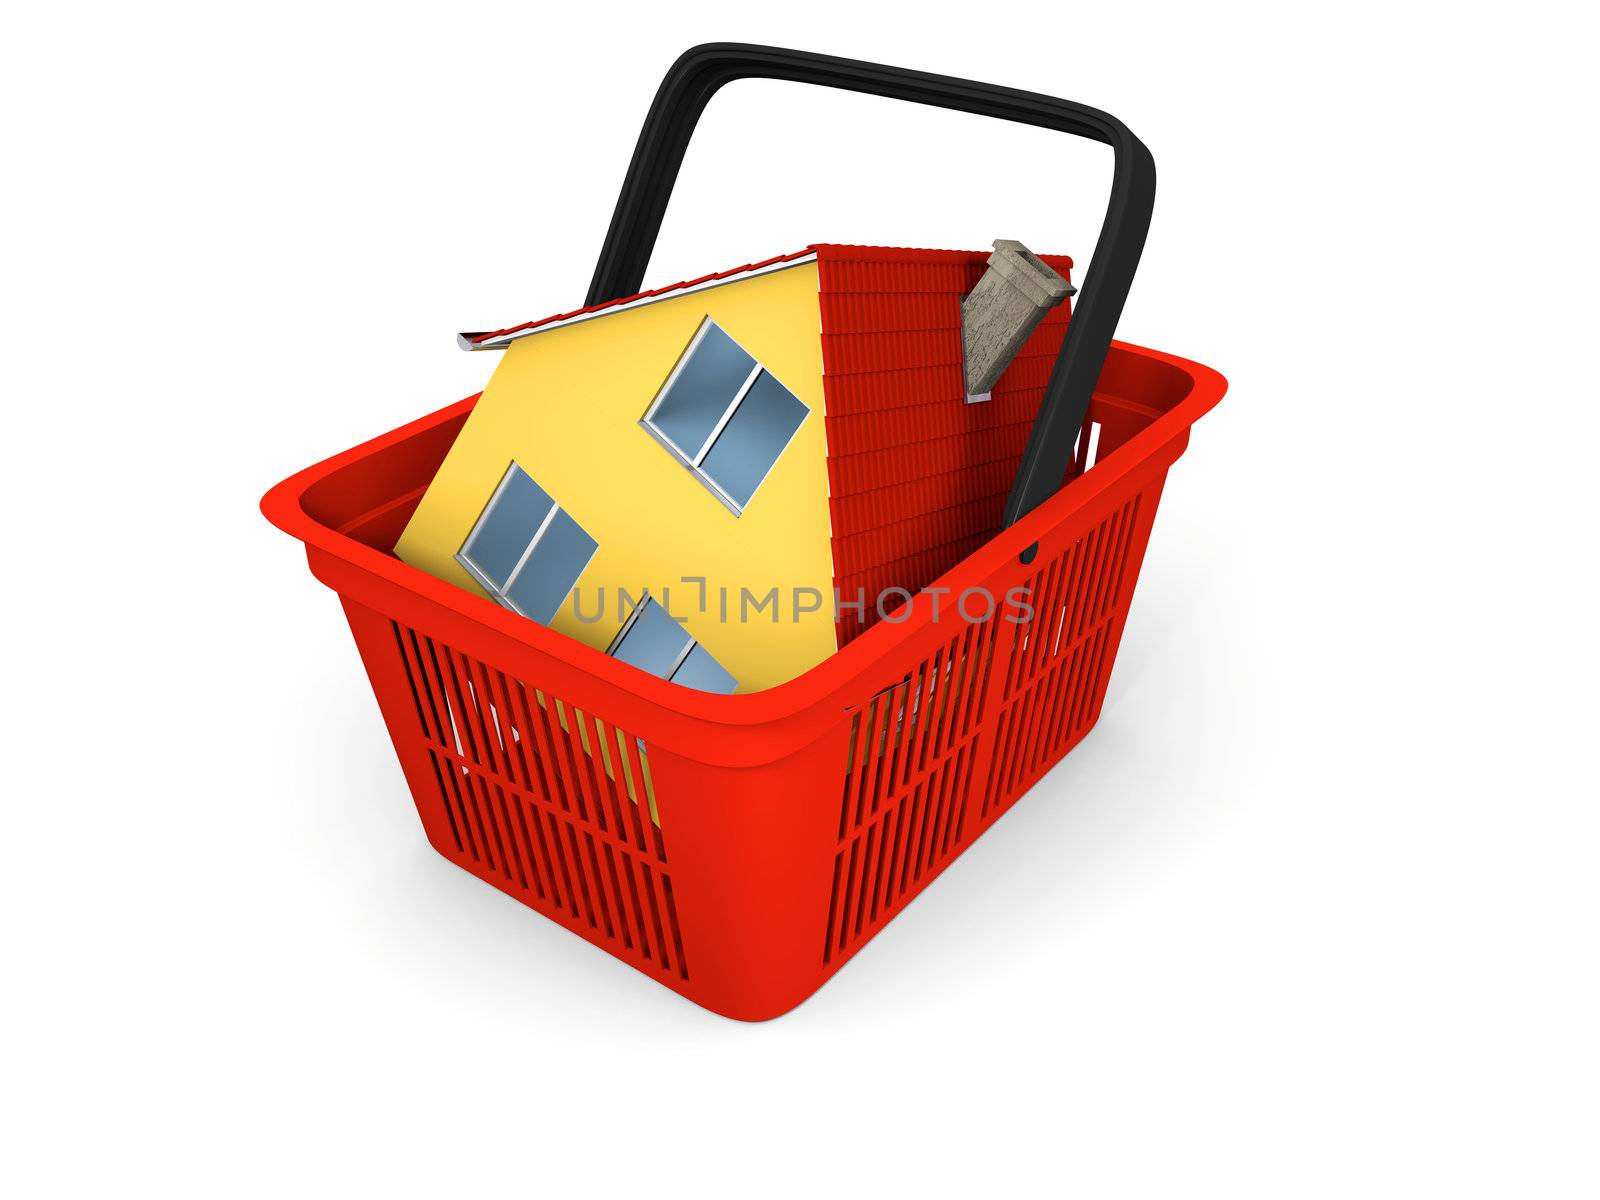 3D illustration of red plastic shopping basket with model of house inside